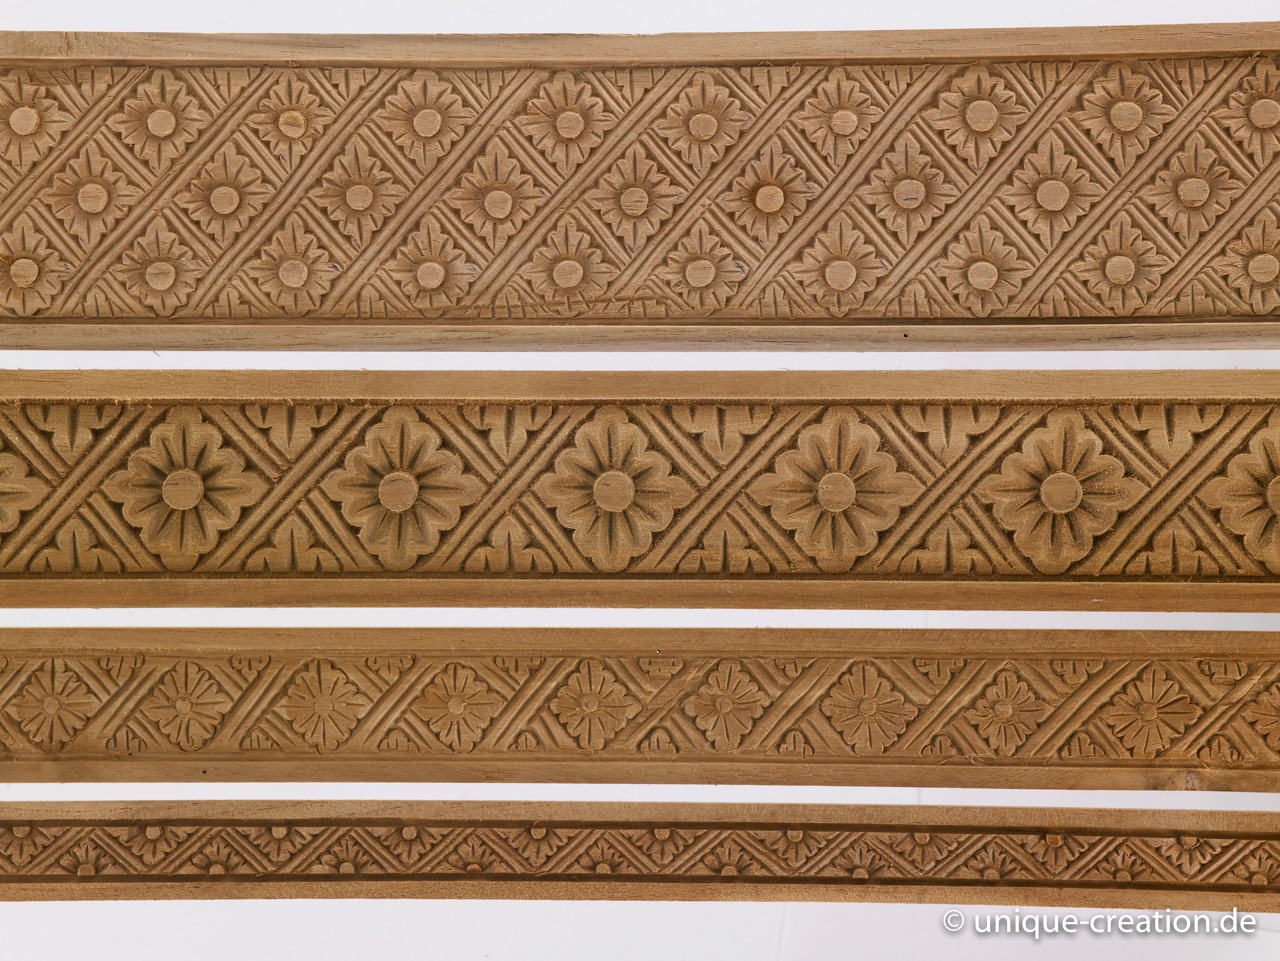 Handcarved wood strips made from teak and other hardwood